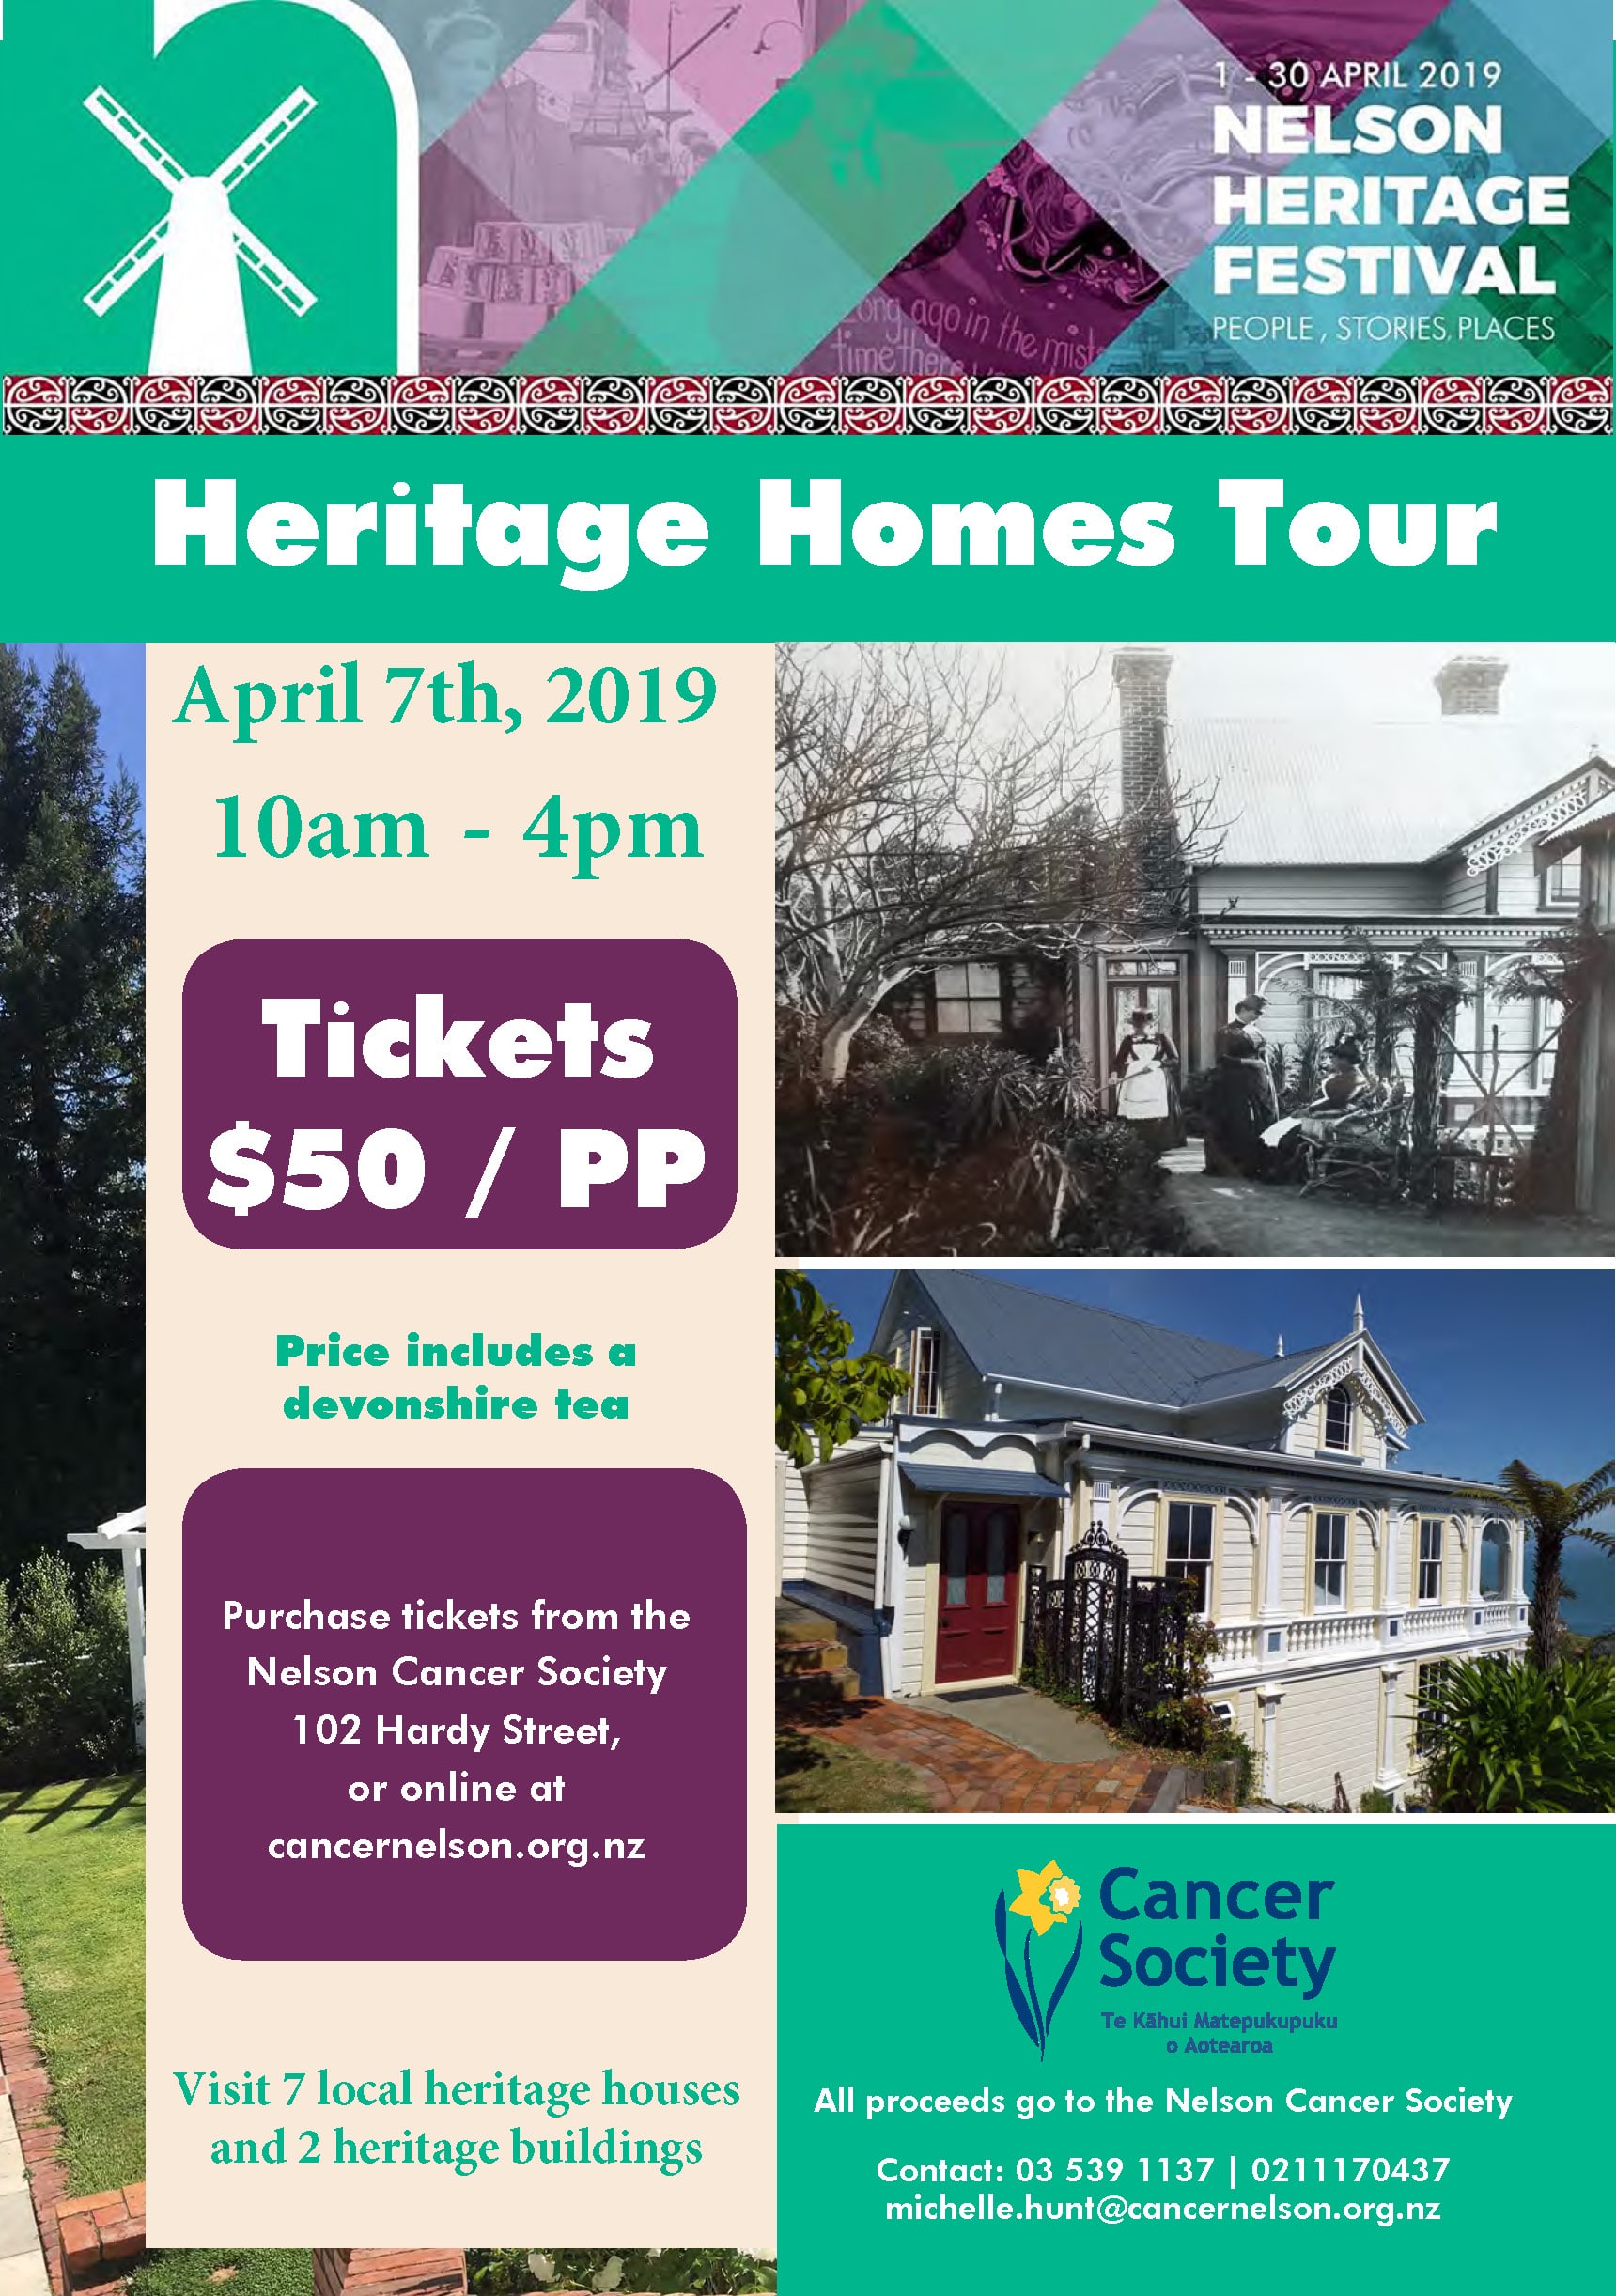 Heritage Homes Tour Sunday 7th April Nelson Cancer Society